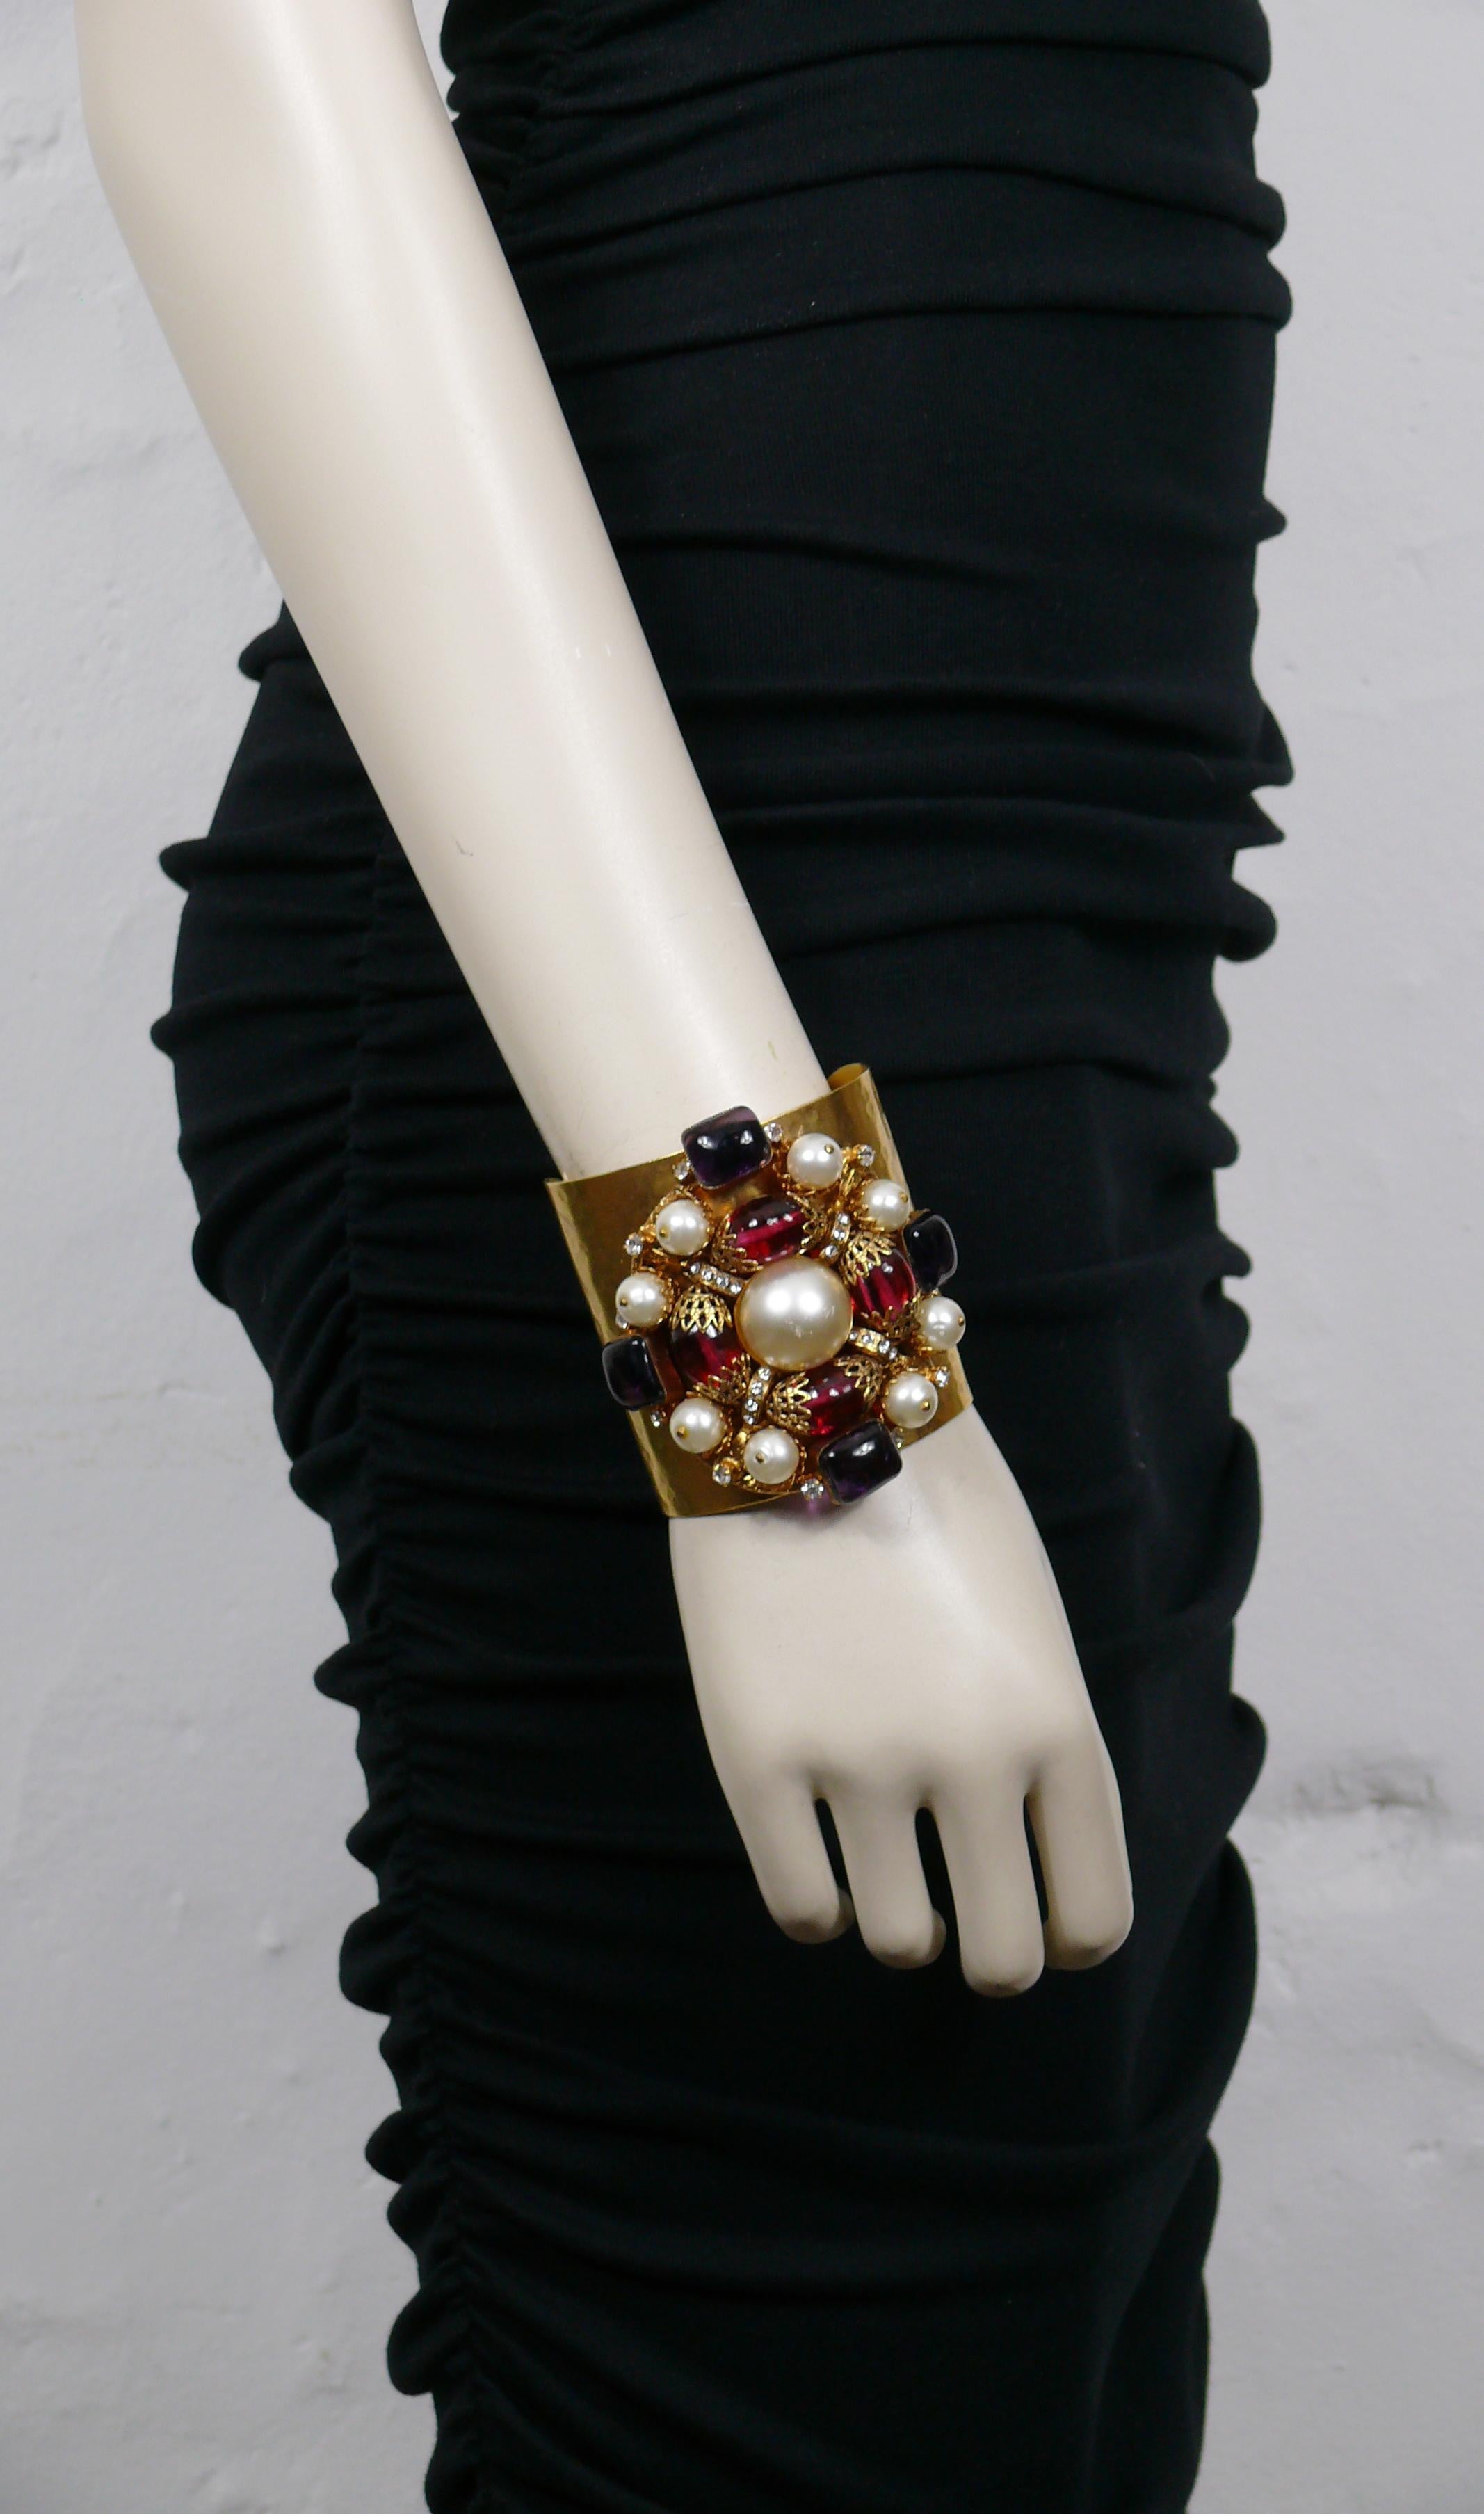 CHANEL gorgeous vintage hammered gold tone cuff bracelet embellished with MAISON GRIPOIX rectangular purple poured glass cabochons and olive shaped red glass beads, faux pearls and clear crystals.

Embossed CHANEL Made in France.

Indicative